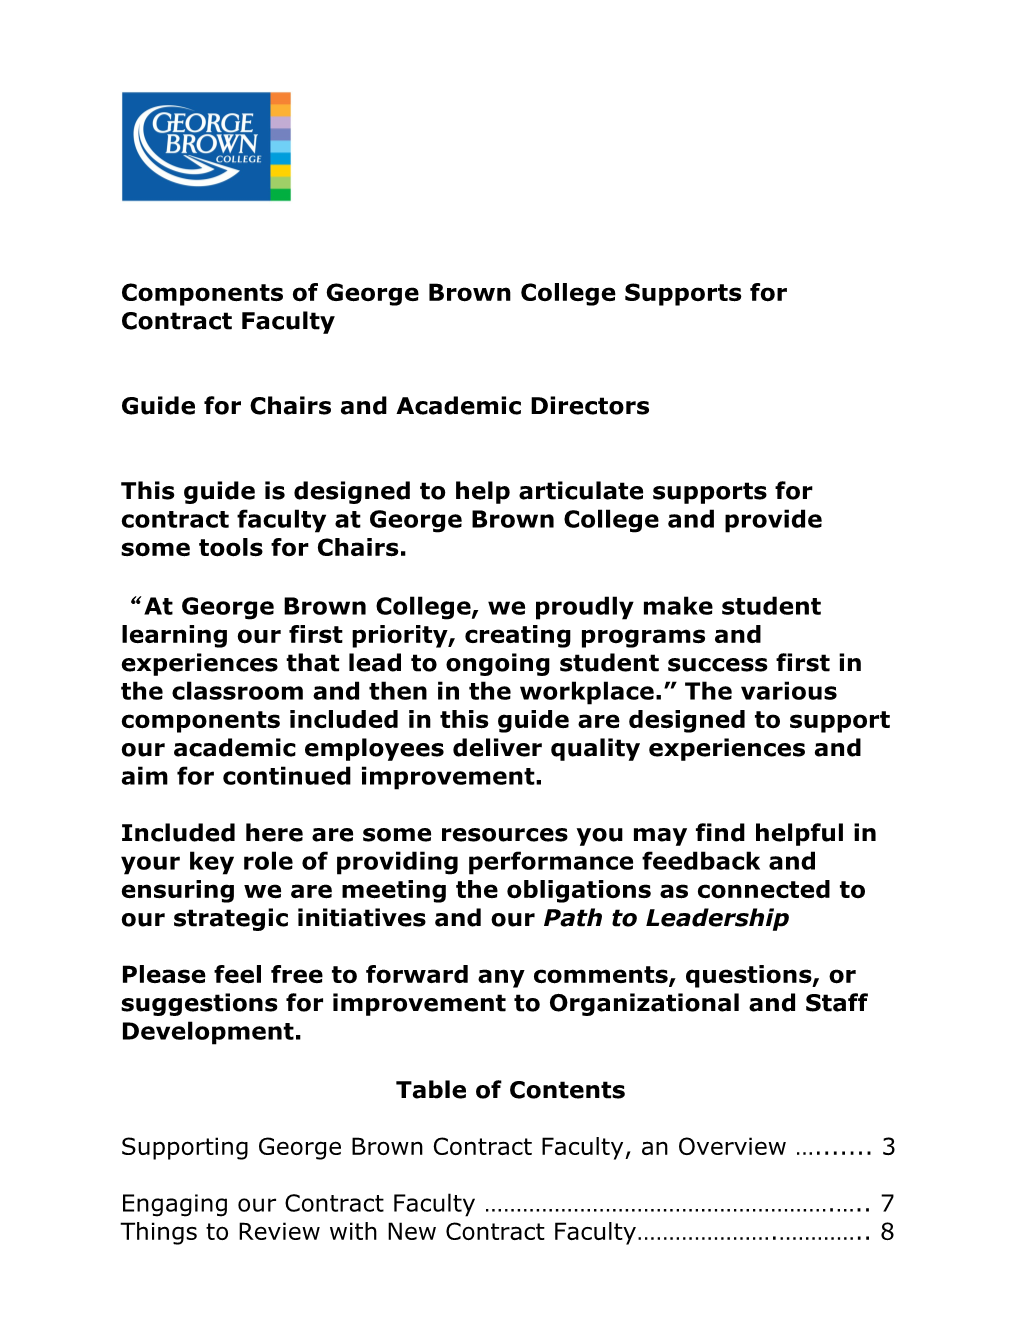 Components of George Brown College Supports for Contract Faculty